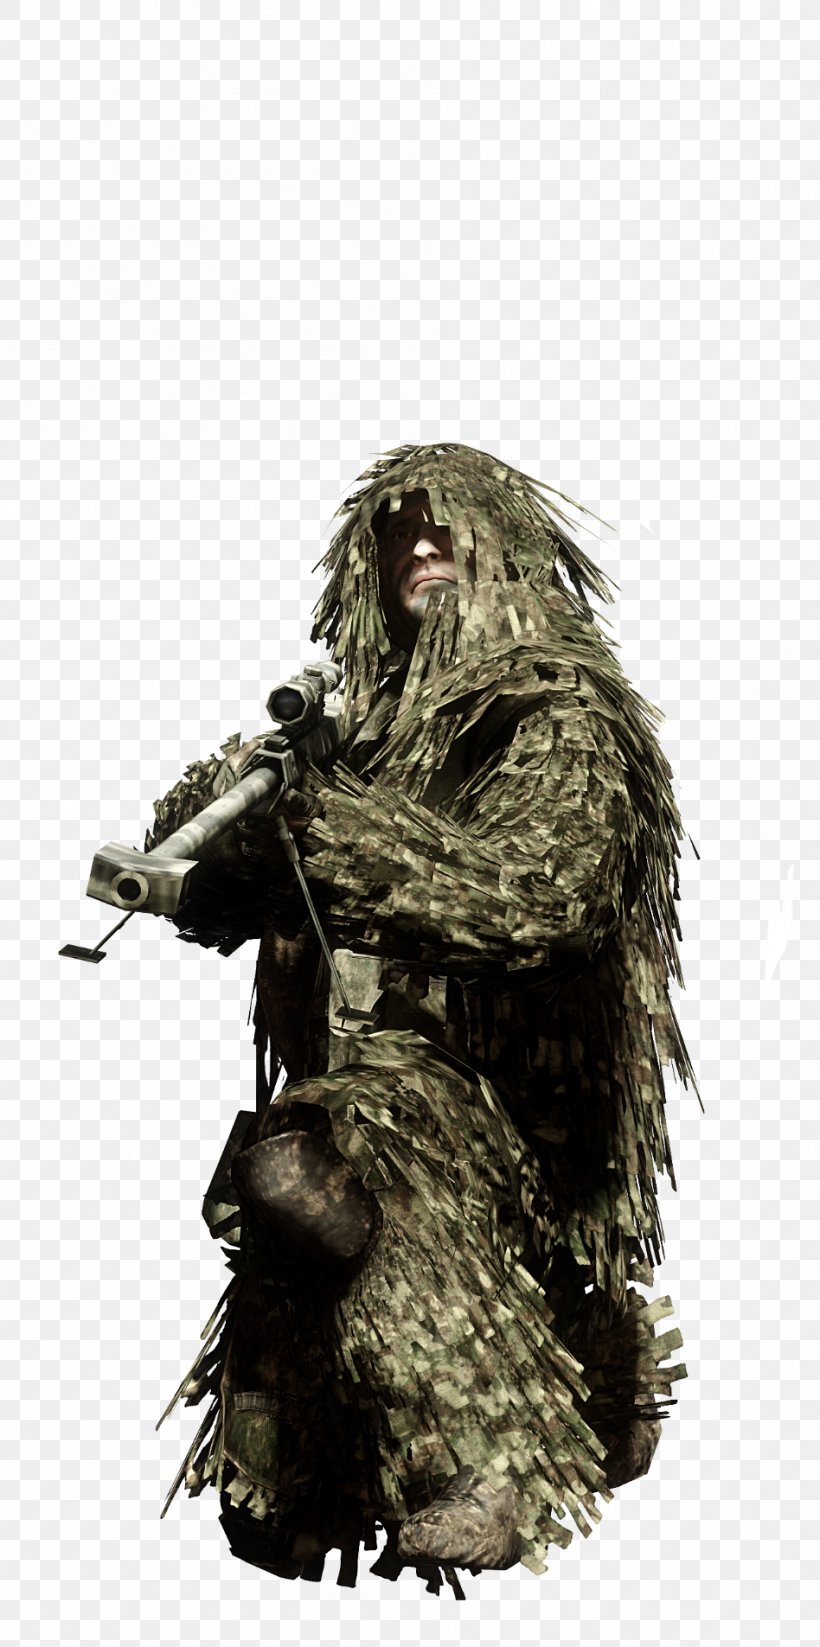 Battlefield: Bad Company 2 Battlefield 2 Battlefield 3 Ghillie Suits Camouflage, PNG, 948x1905px, Battlefield Bad Company 2, Battlefield, Battlefield 2, Battlefield 3, Camouflage Download Free